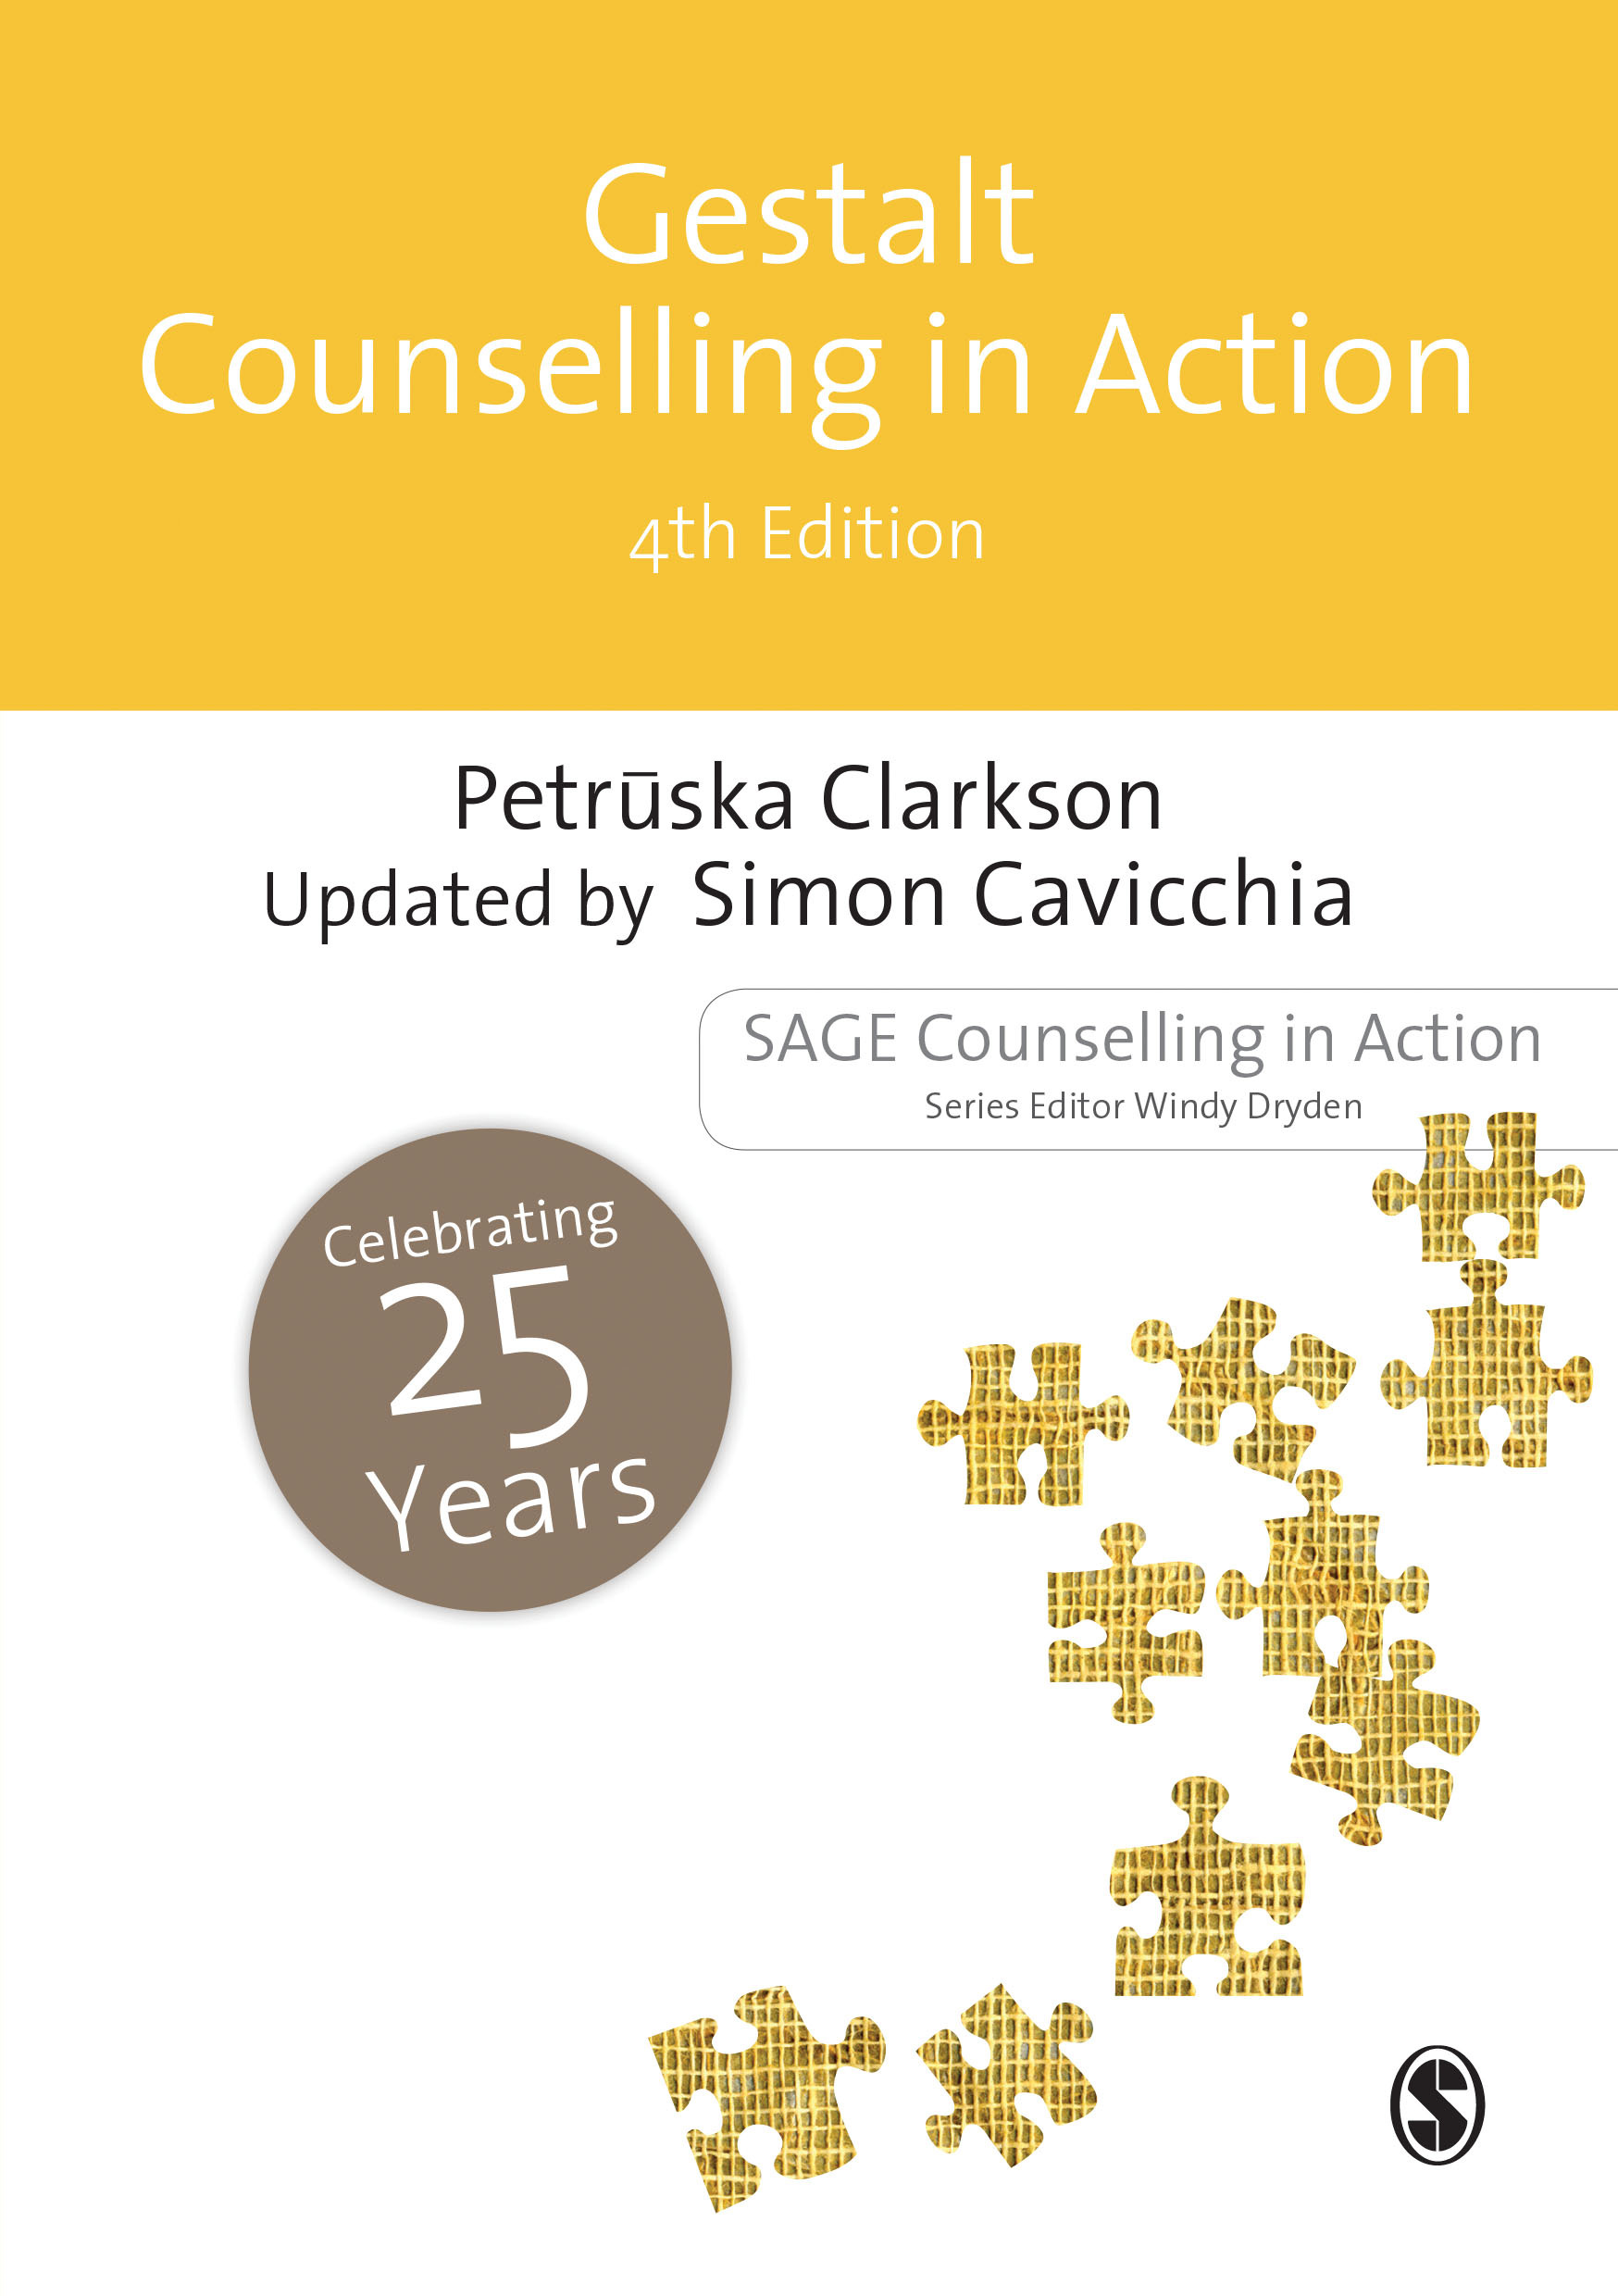 Gestalt Counselling in Action book cover image 